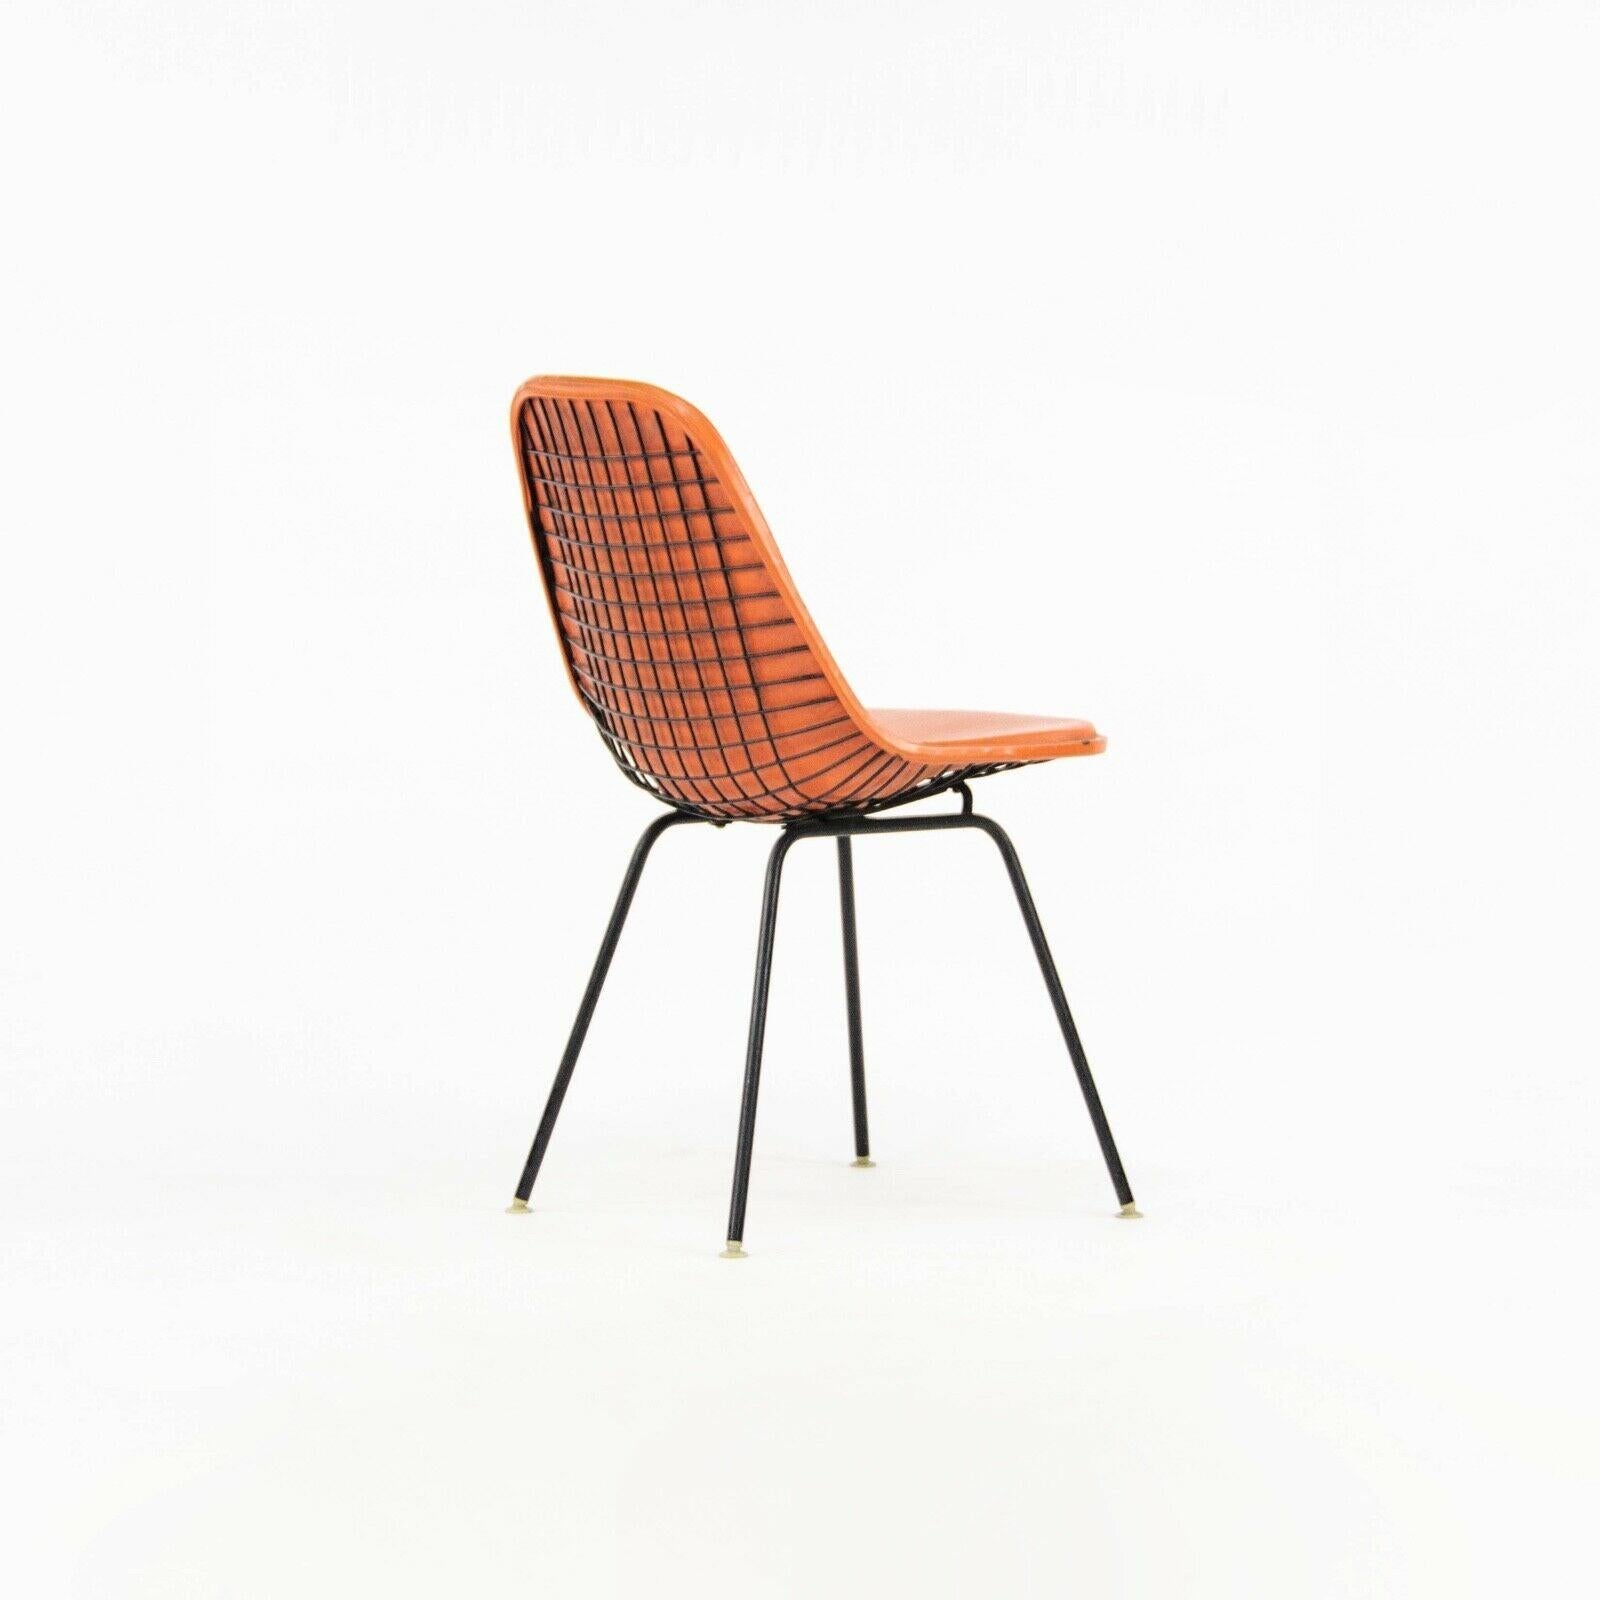 American 1957 Herman Miller Eames DKX Wire Dining Chair with Full Naugahyde Orange Pad For Sale